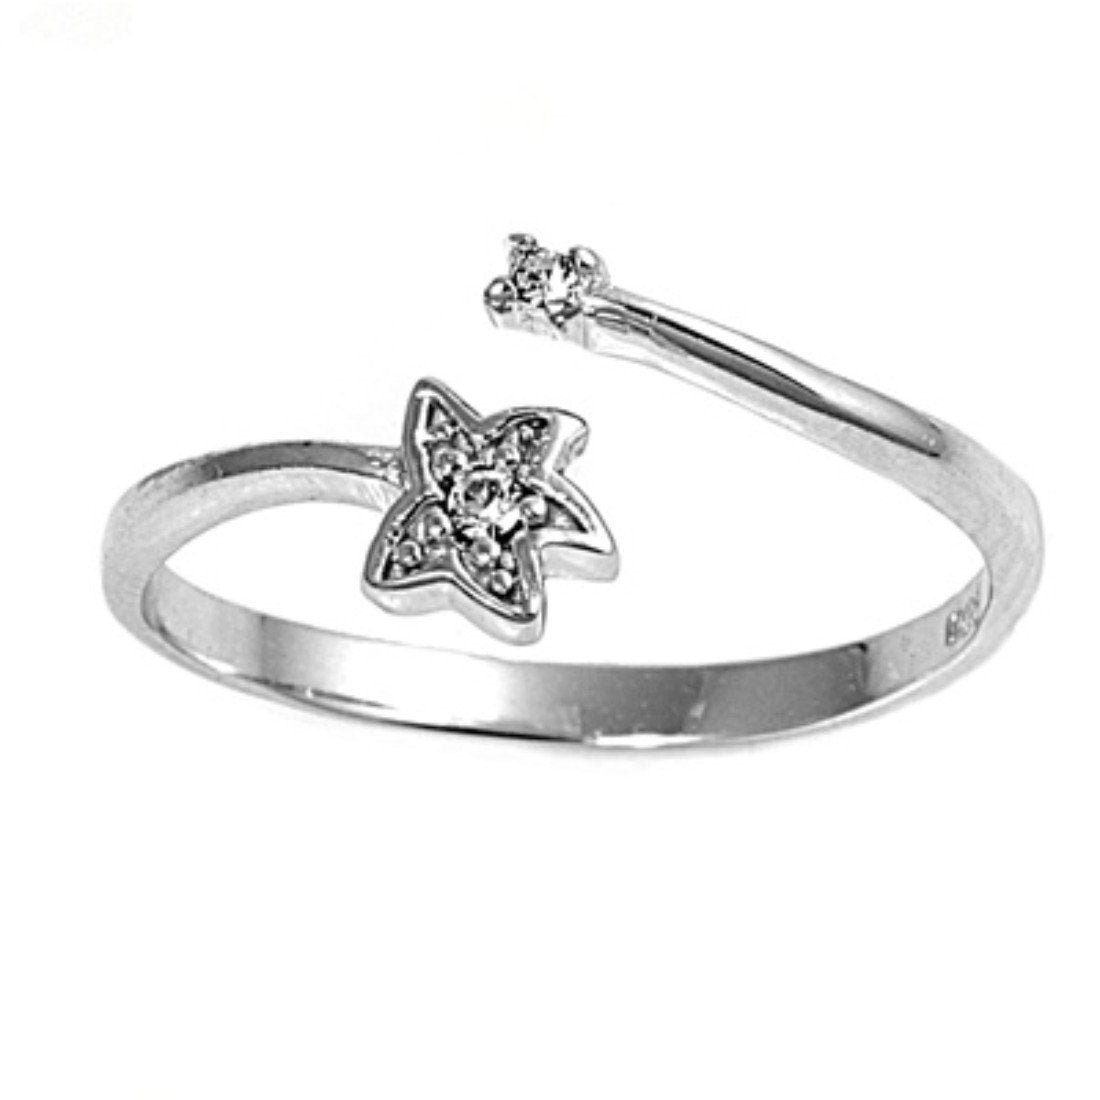 Silver Toe Ring Star Simulated Cubic Zirconia Adjustable Band 925 Sterling Silver (8mm)